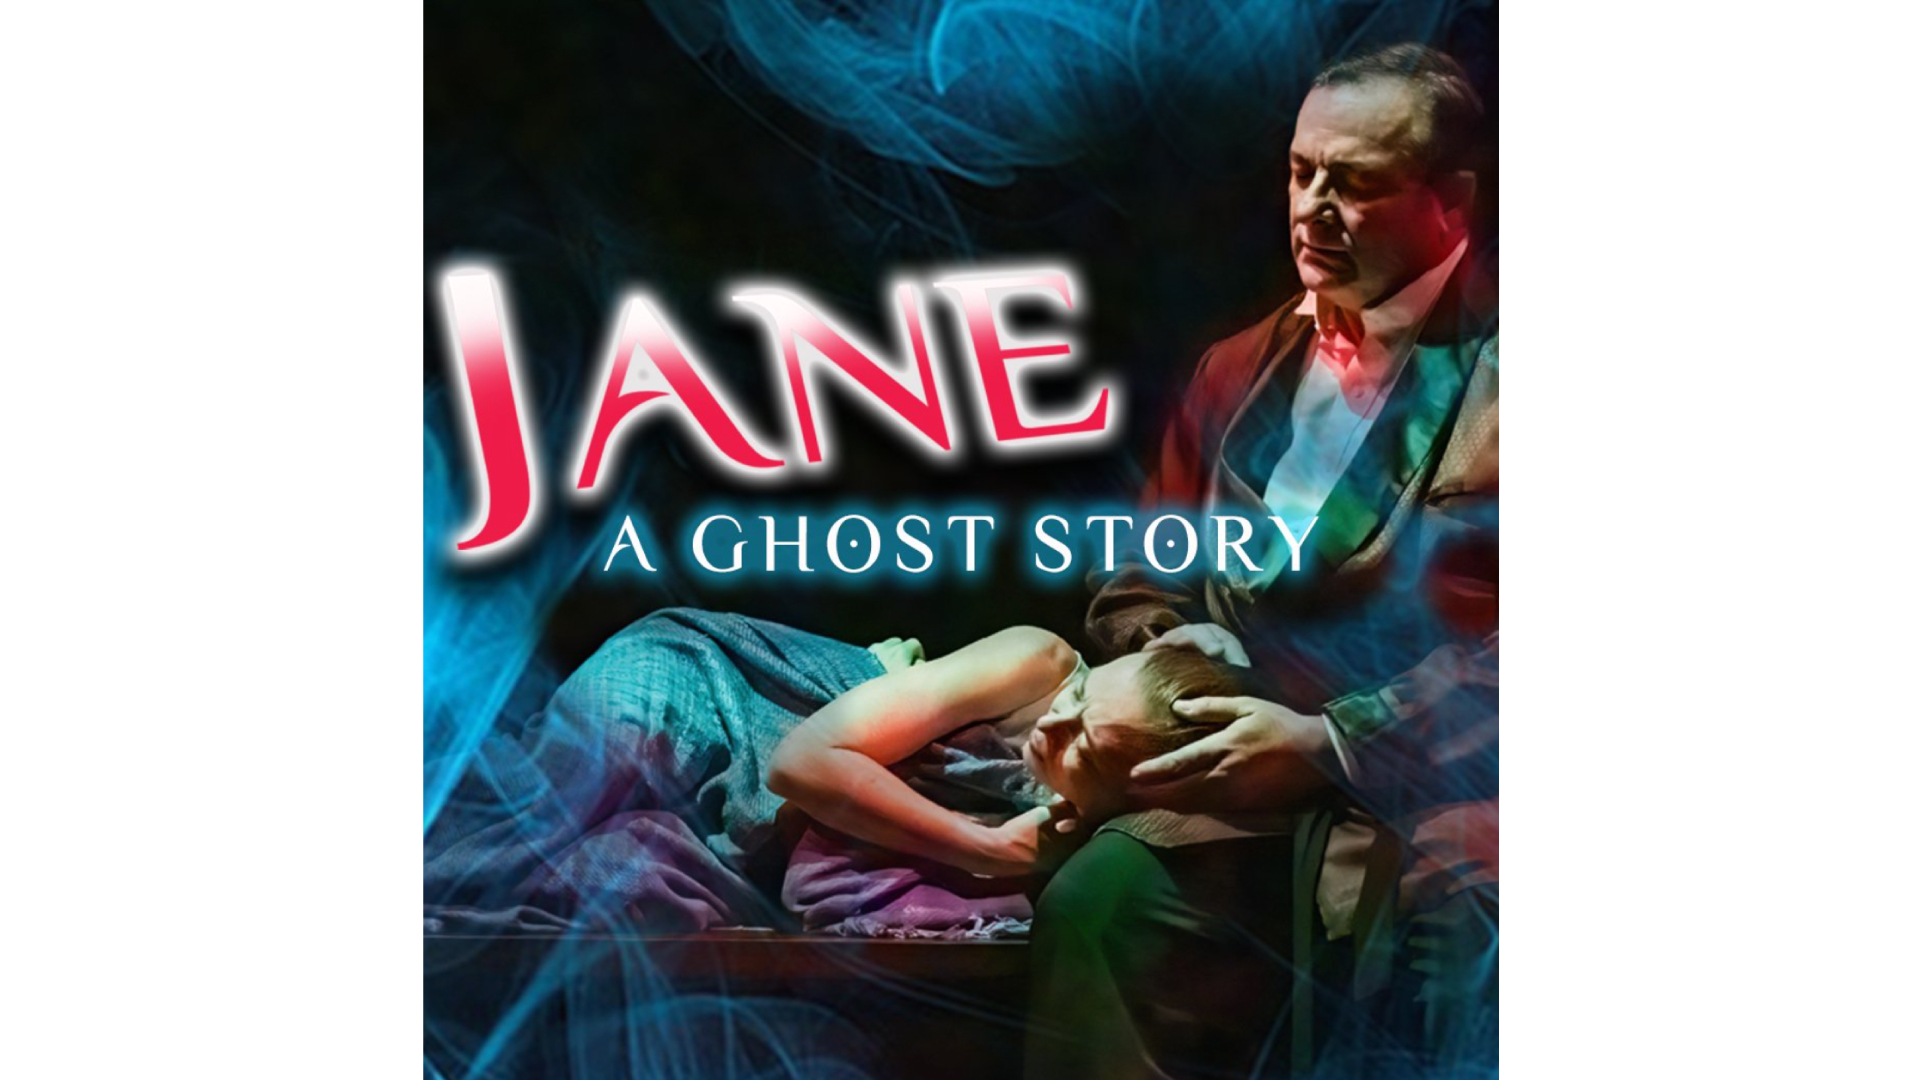 Jane A Ghost Story